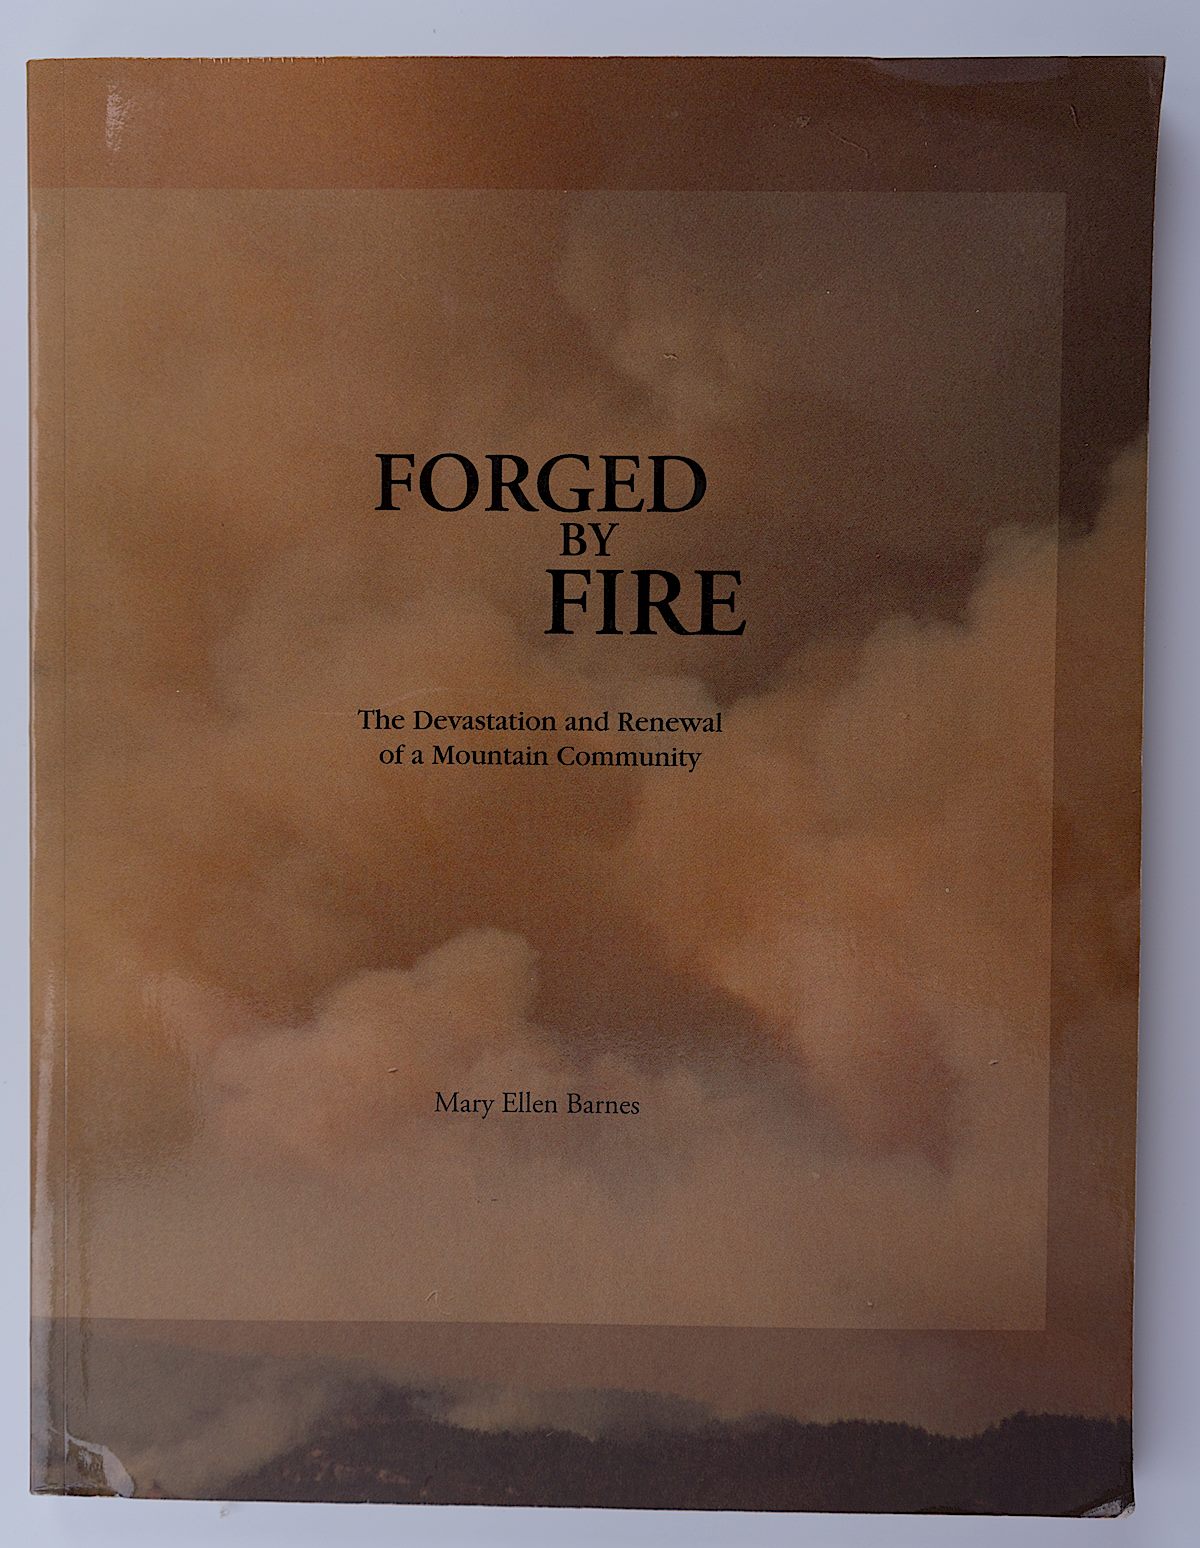 Forged by Fire: The Devastation and Renewal of a Mountain Community, Mary Ellen Barnes. March 2016.